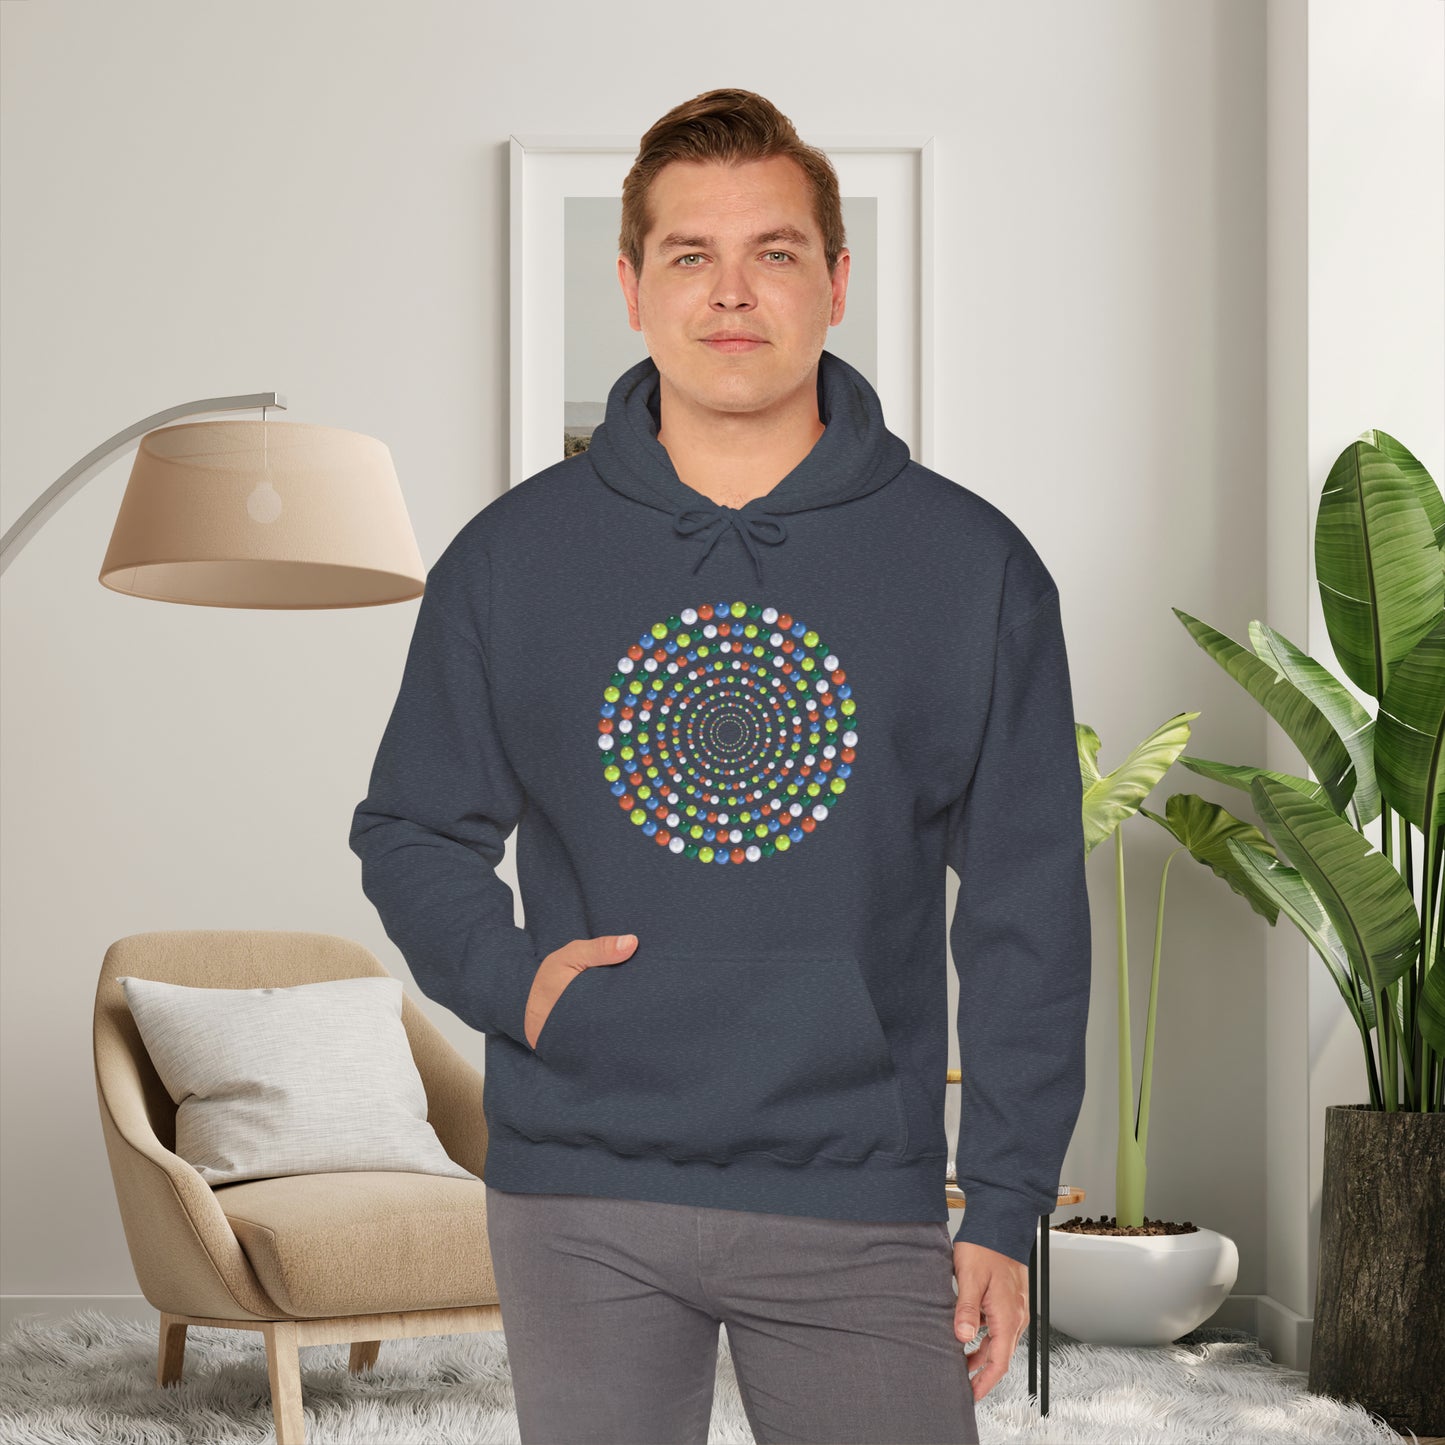 Marbles, colorful and so much fun on this Unisex Heavy Blend™ Hooded Sweatshirt